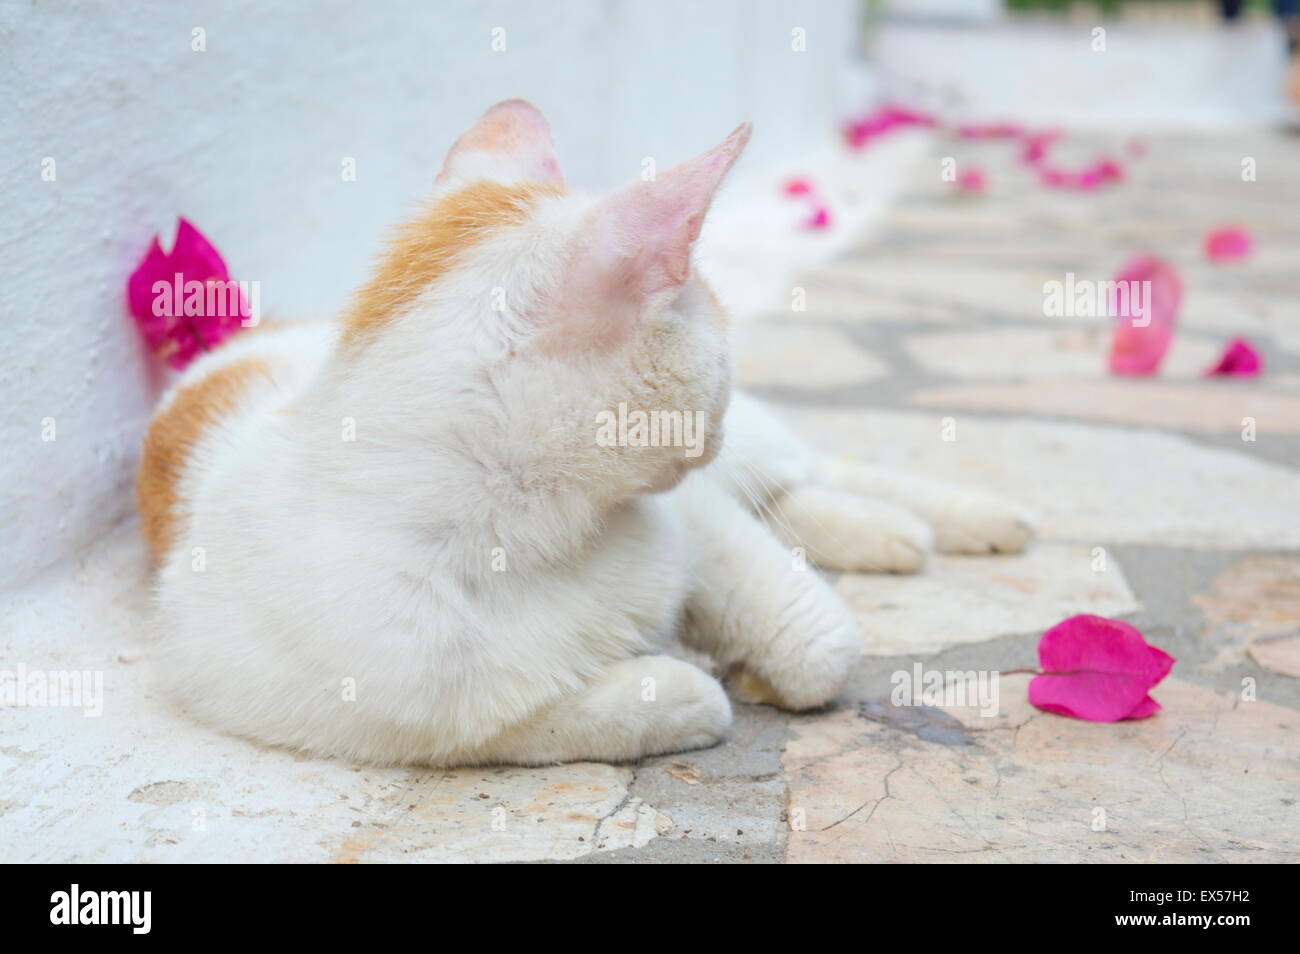 Cat lying at concrete floor covered with pink flower petals Stock Photo